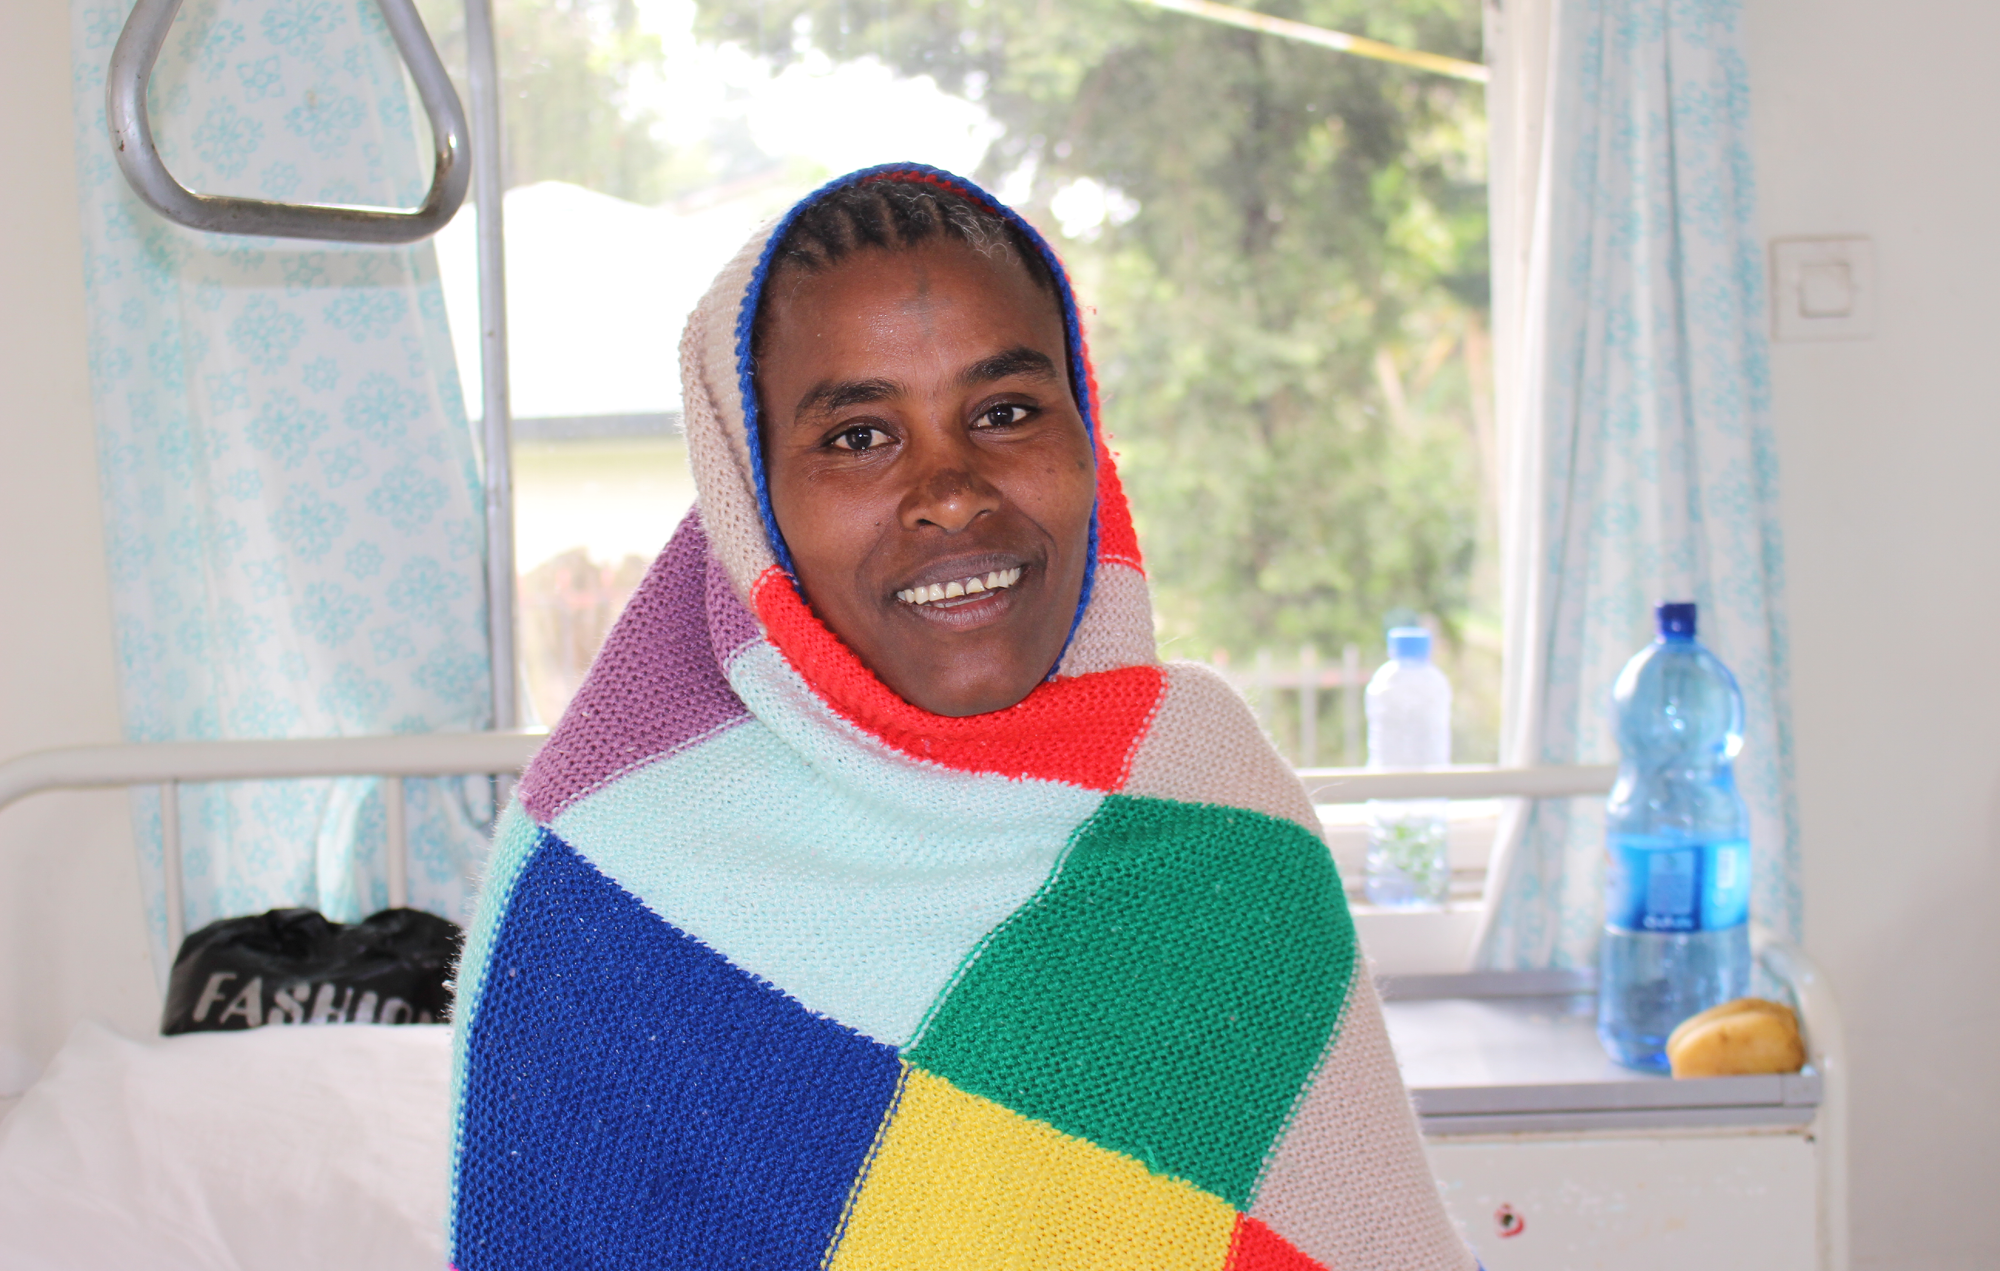 Mulu wrapped in a blanket, smiling in the hospital ward